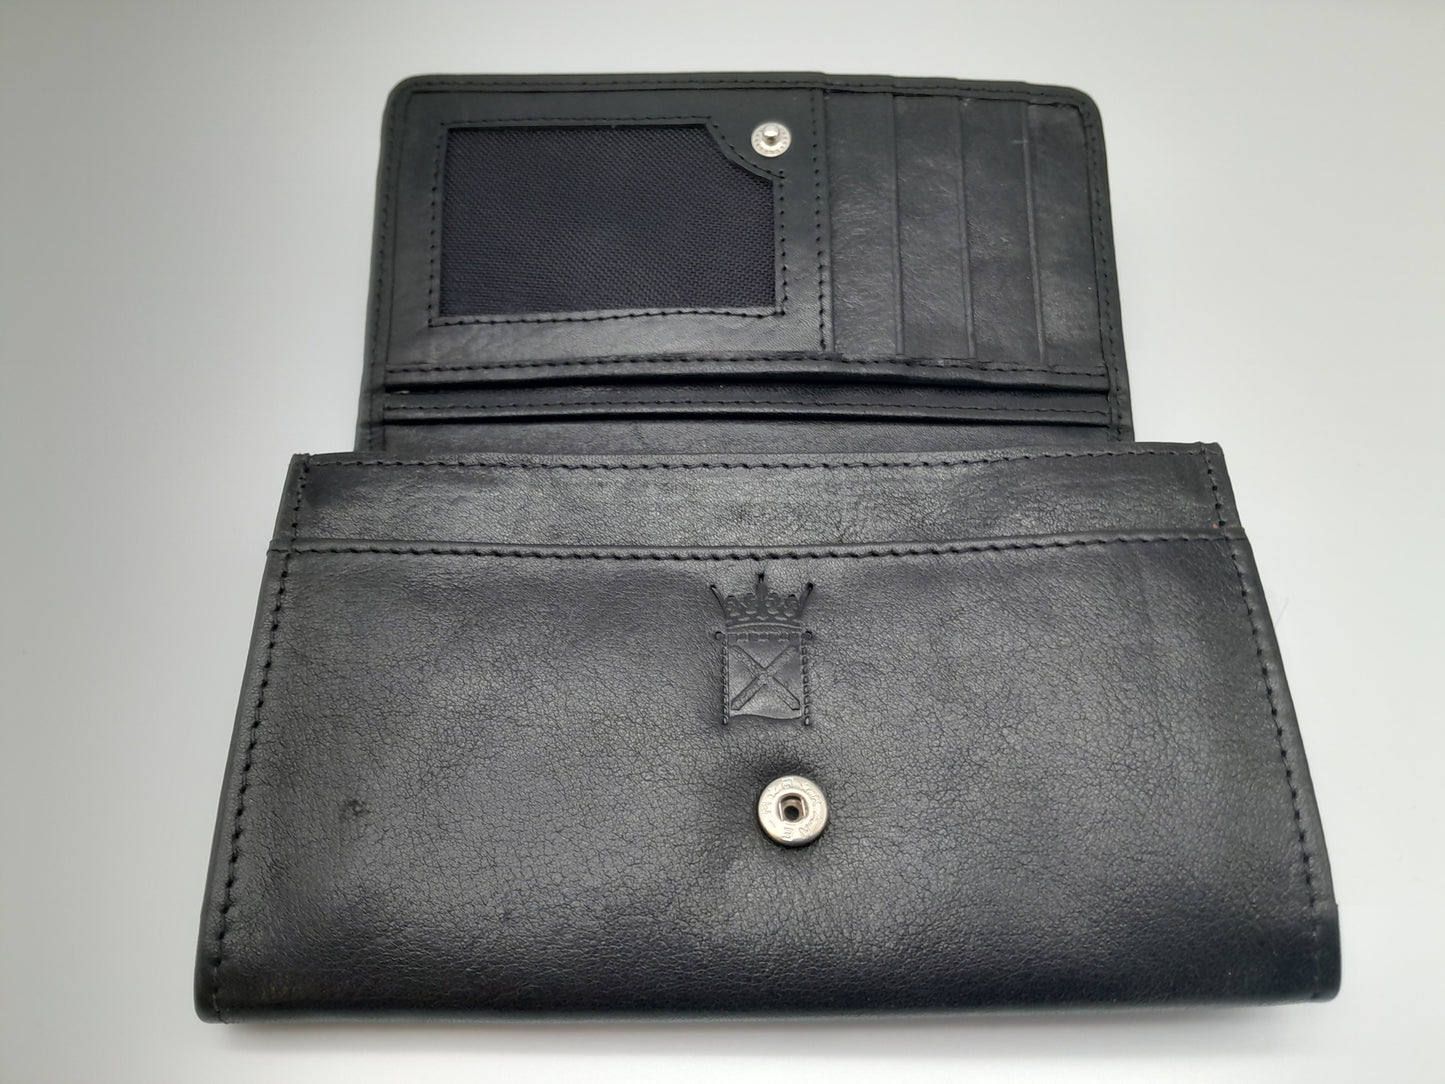 The purse open. Black leather embossed with the symbol of the Scottish Parliament.